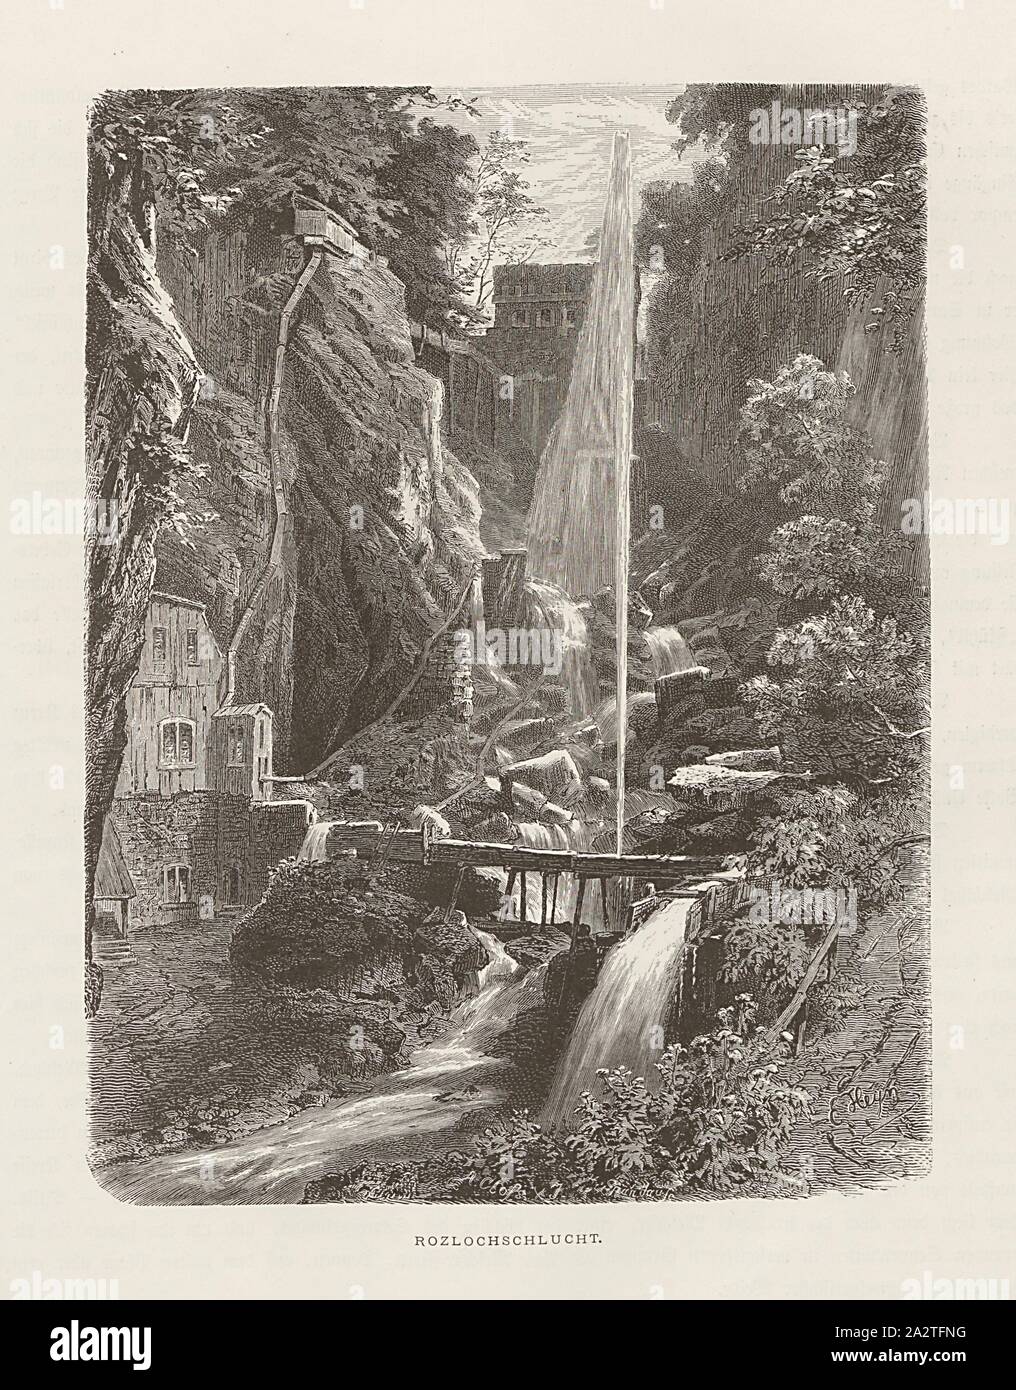 Rozlochschlucht View Of The Rotzlochschlucht With Waterfall Near Stans From The 19th Century Signed E Heyn